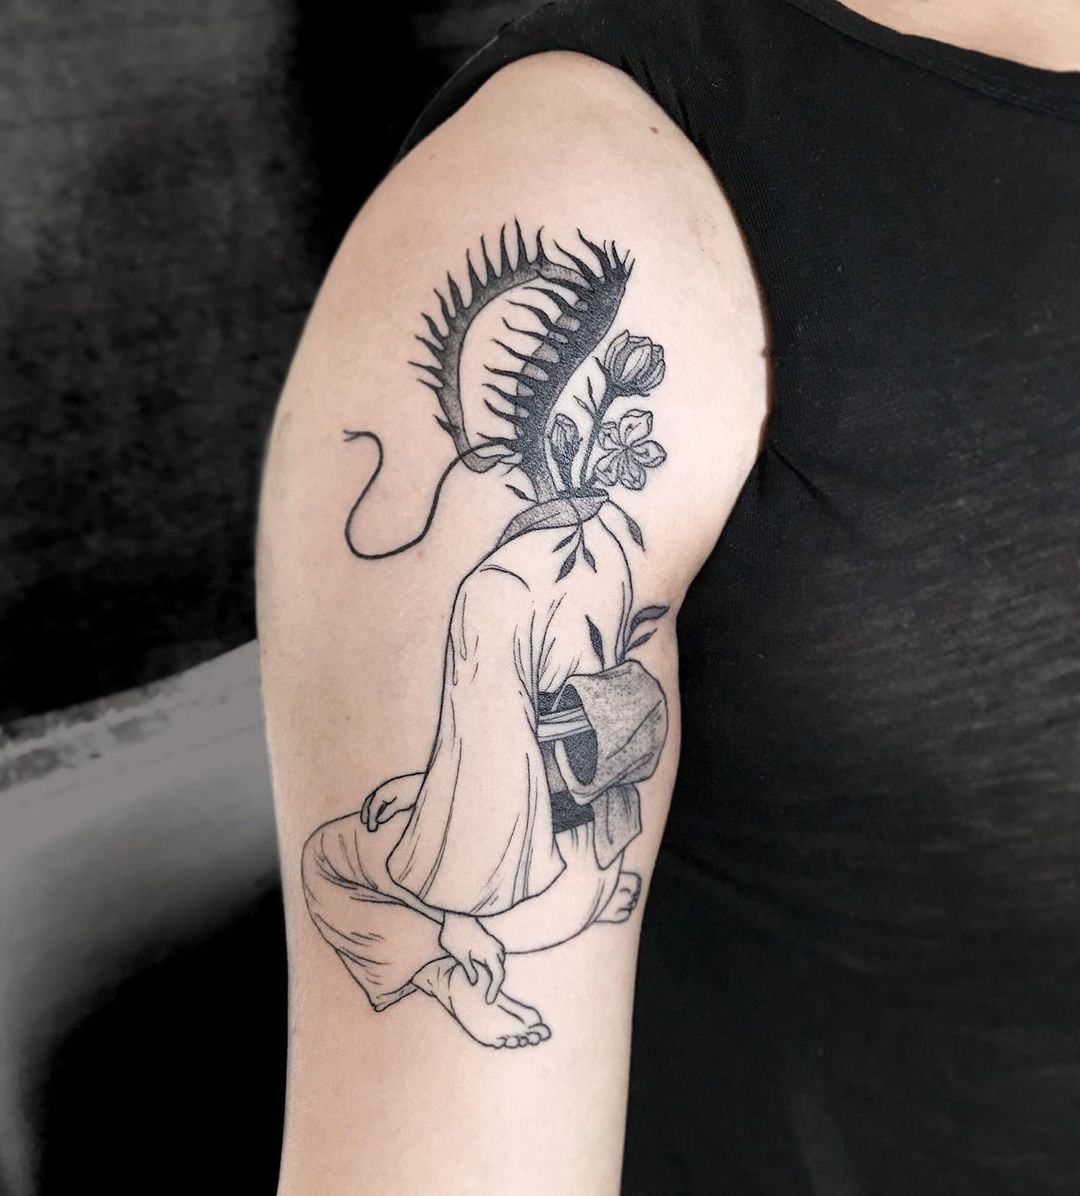 25 surrealism tattoos that will bend your mind